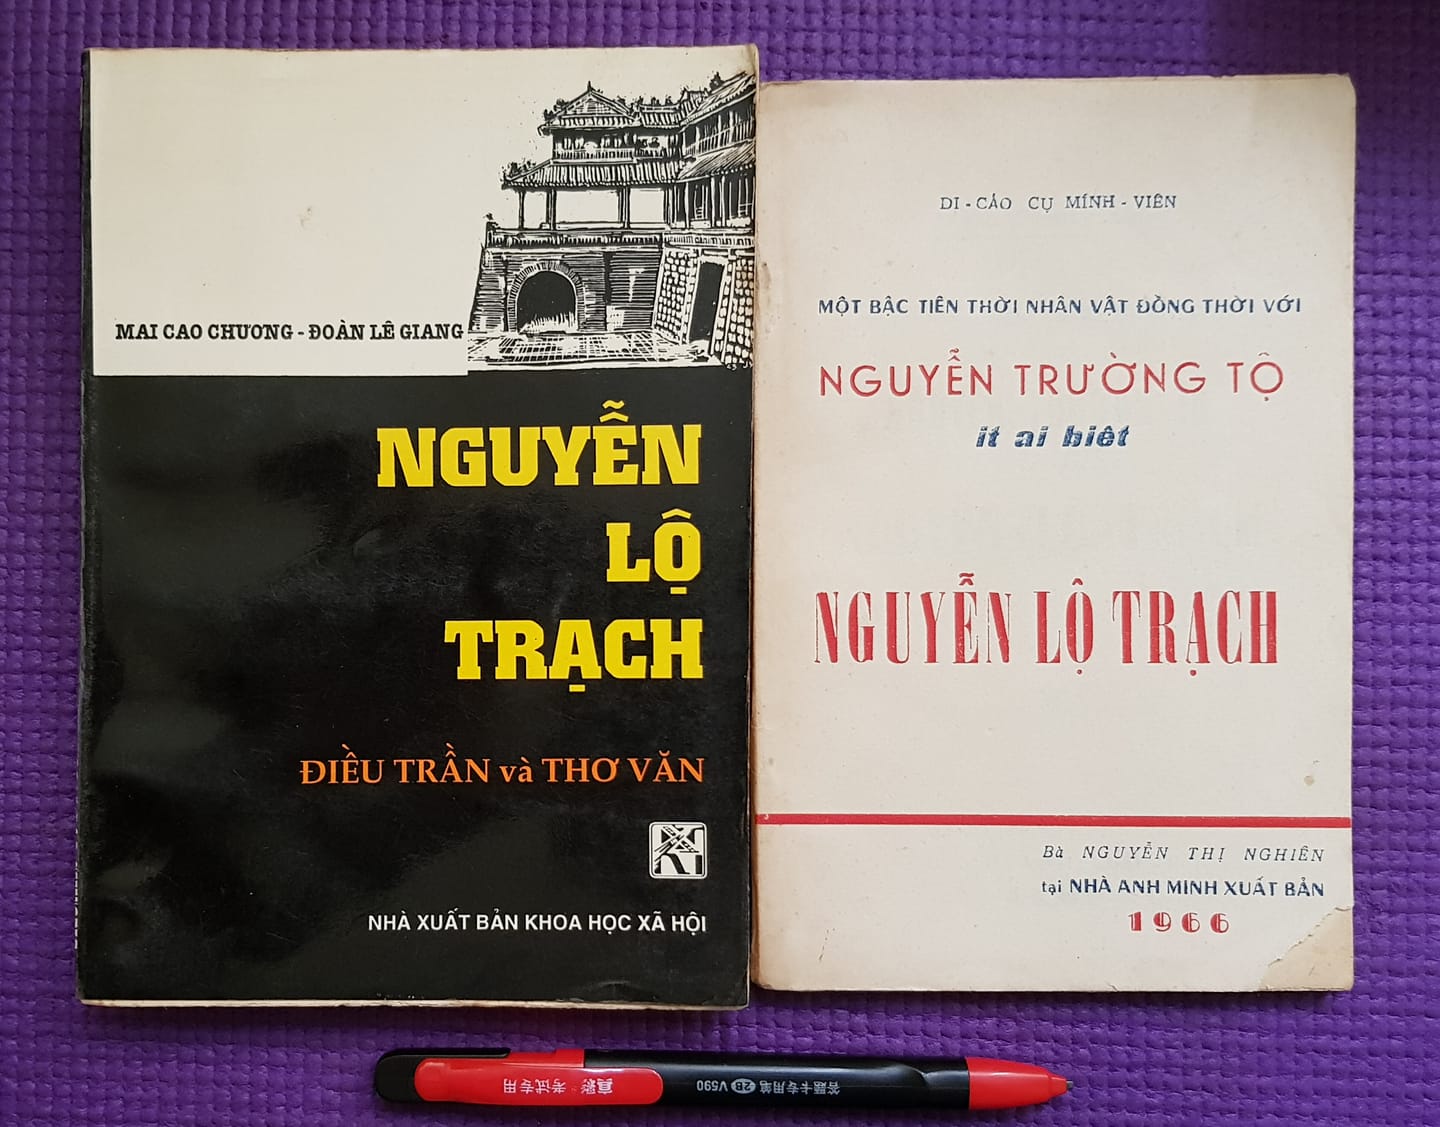 canh tan nuoc viet ky 2 nguyen lo trach thiet tha voi van nuoc